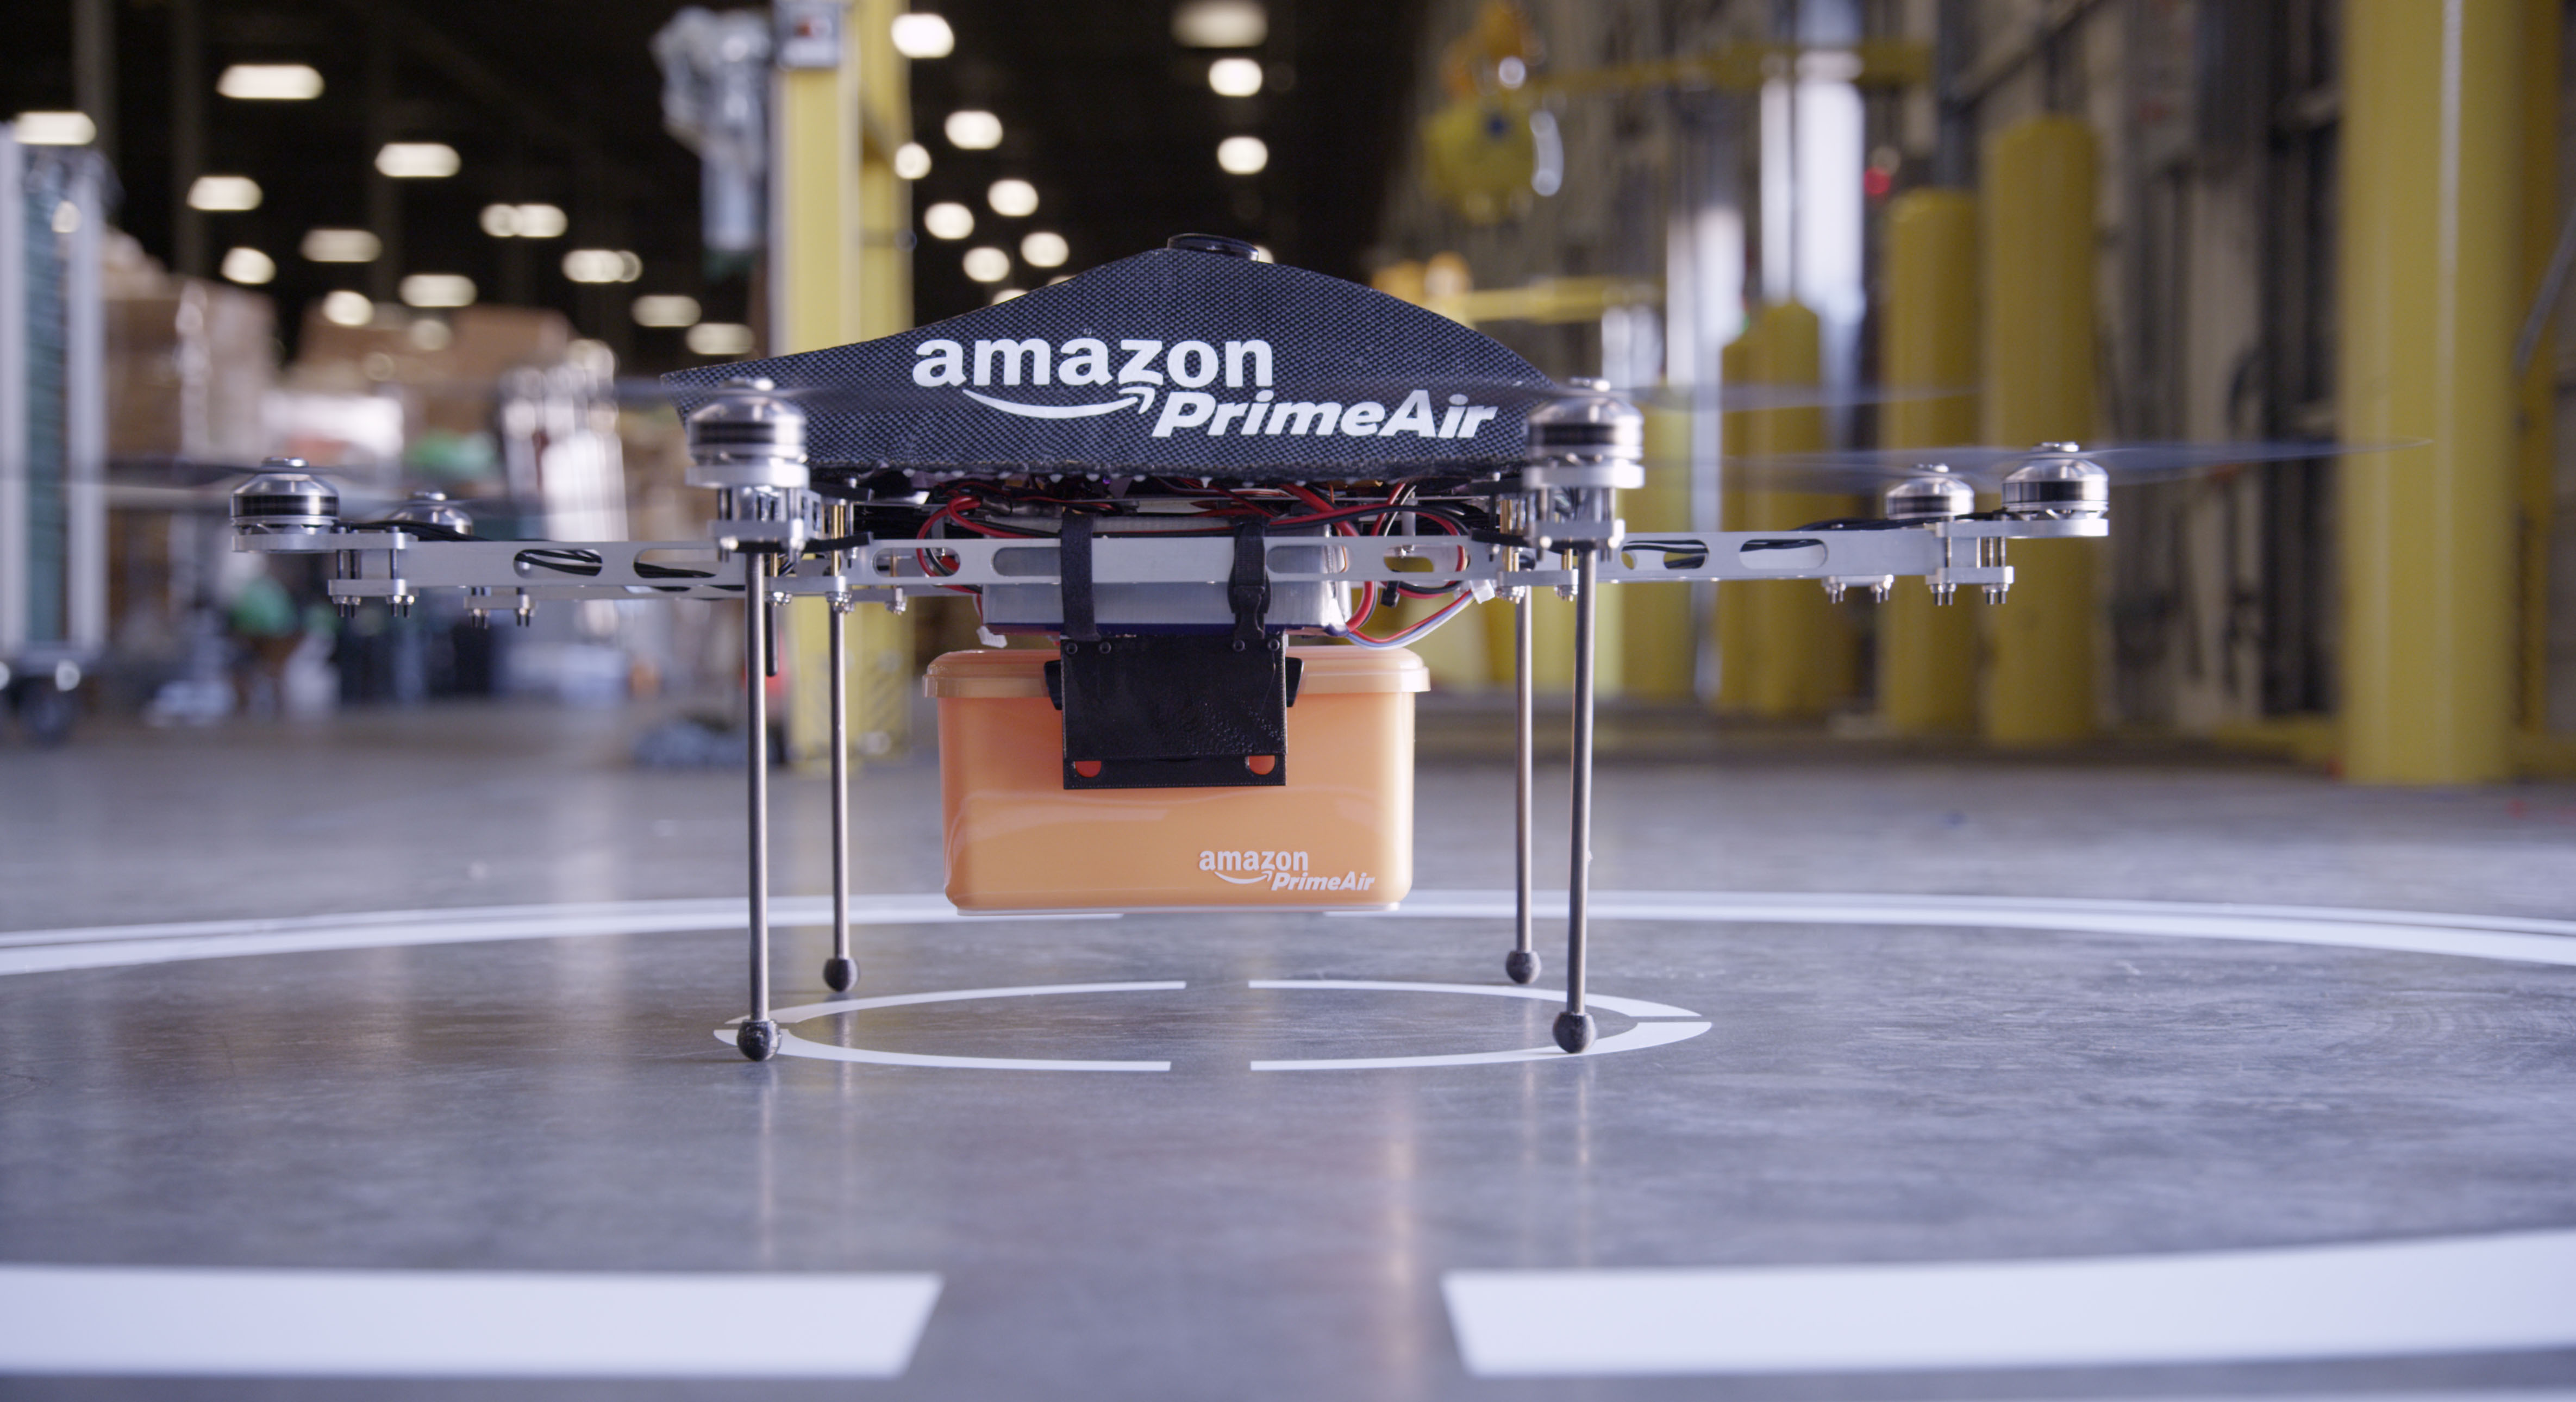 What is Amazon Prime Air?